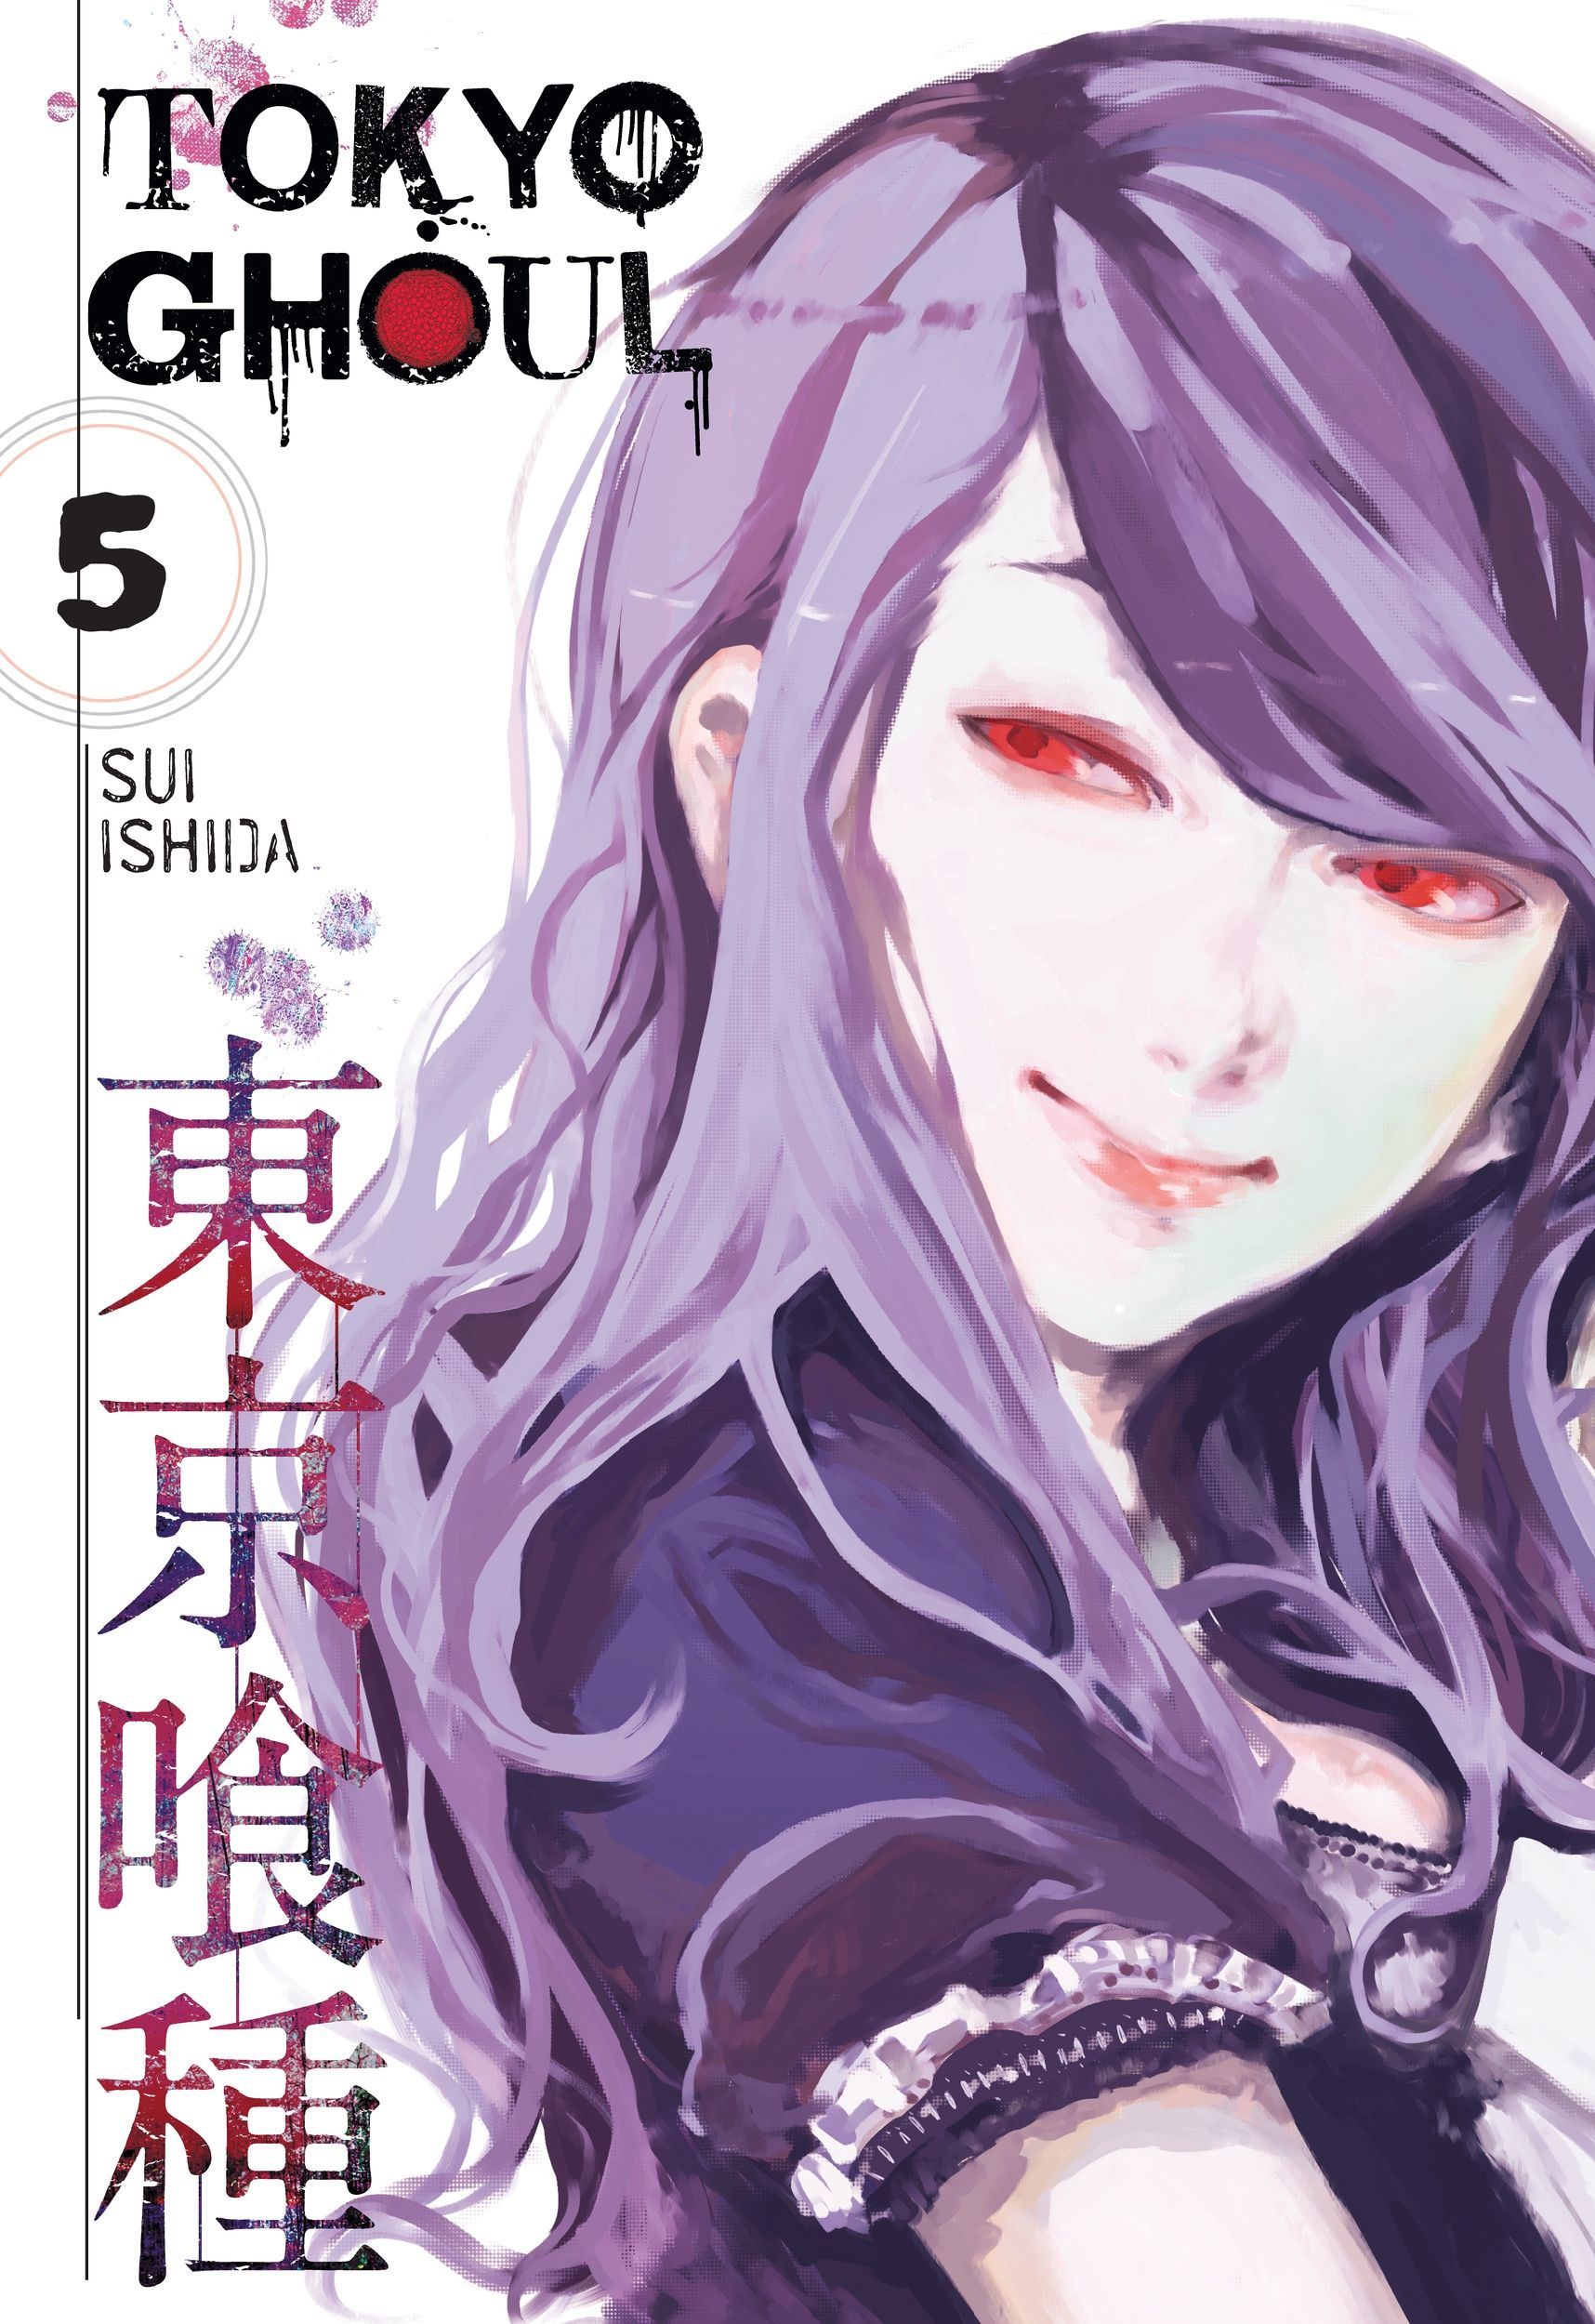 Tokyo Ghoul Volume 5 cover featuring Rize smiling